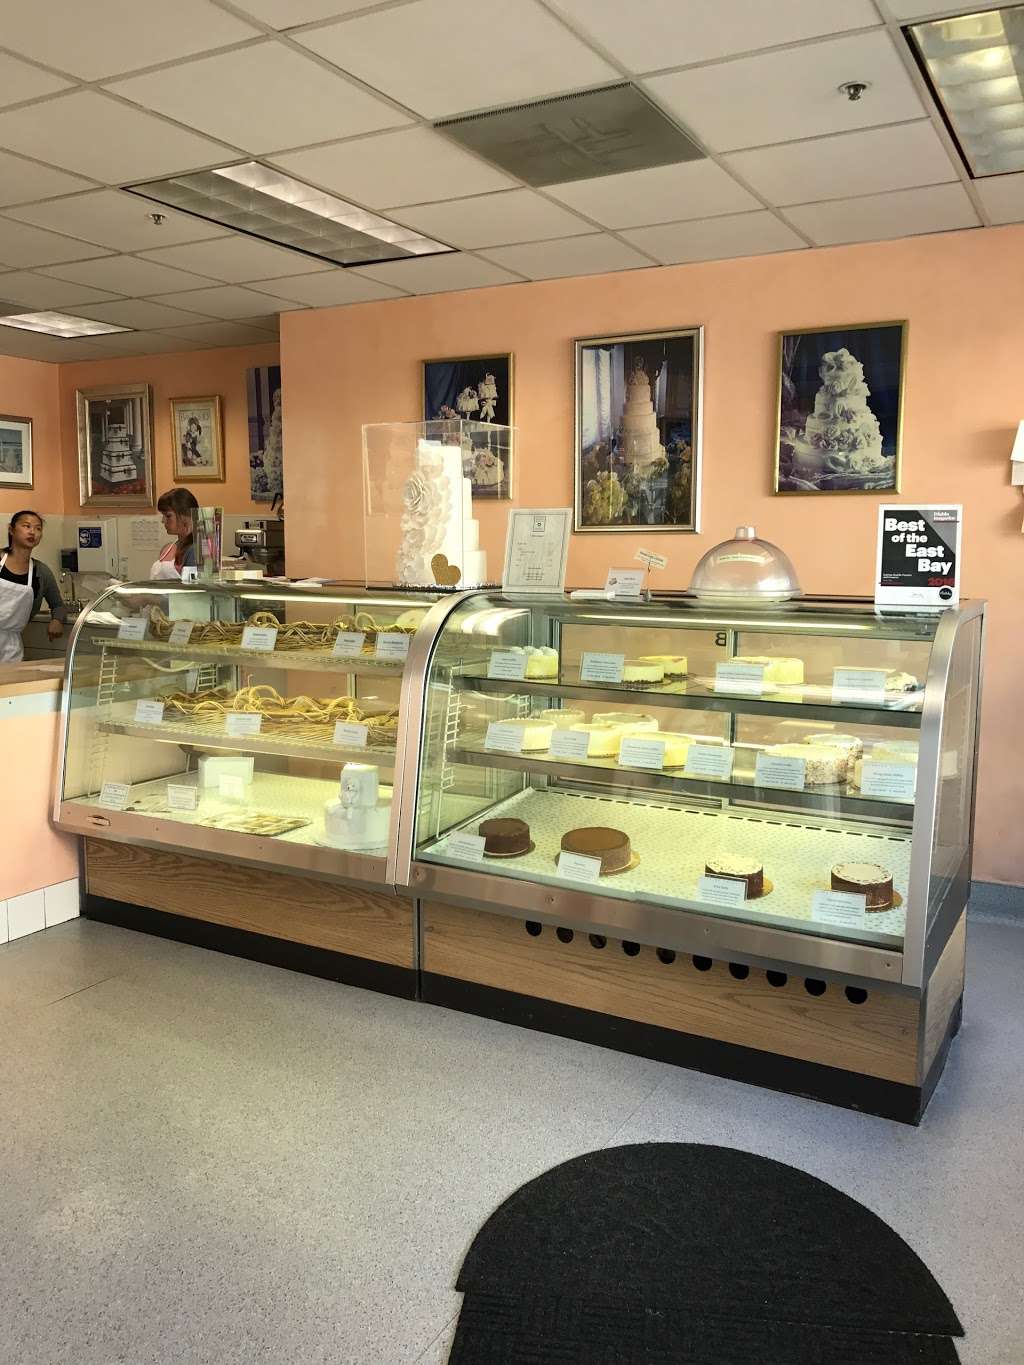 Katrina Rozelle Pastries and Desserts | 5931 College Ave, Oakland, CA 94618 | Phone: (510) 655-3209